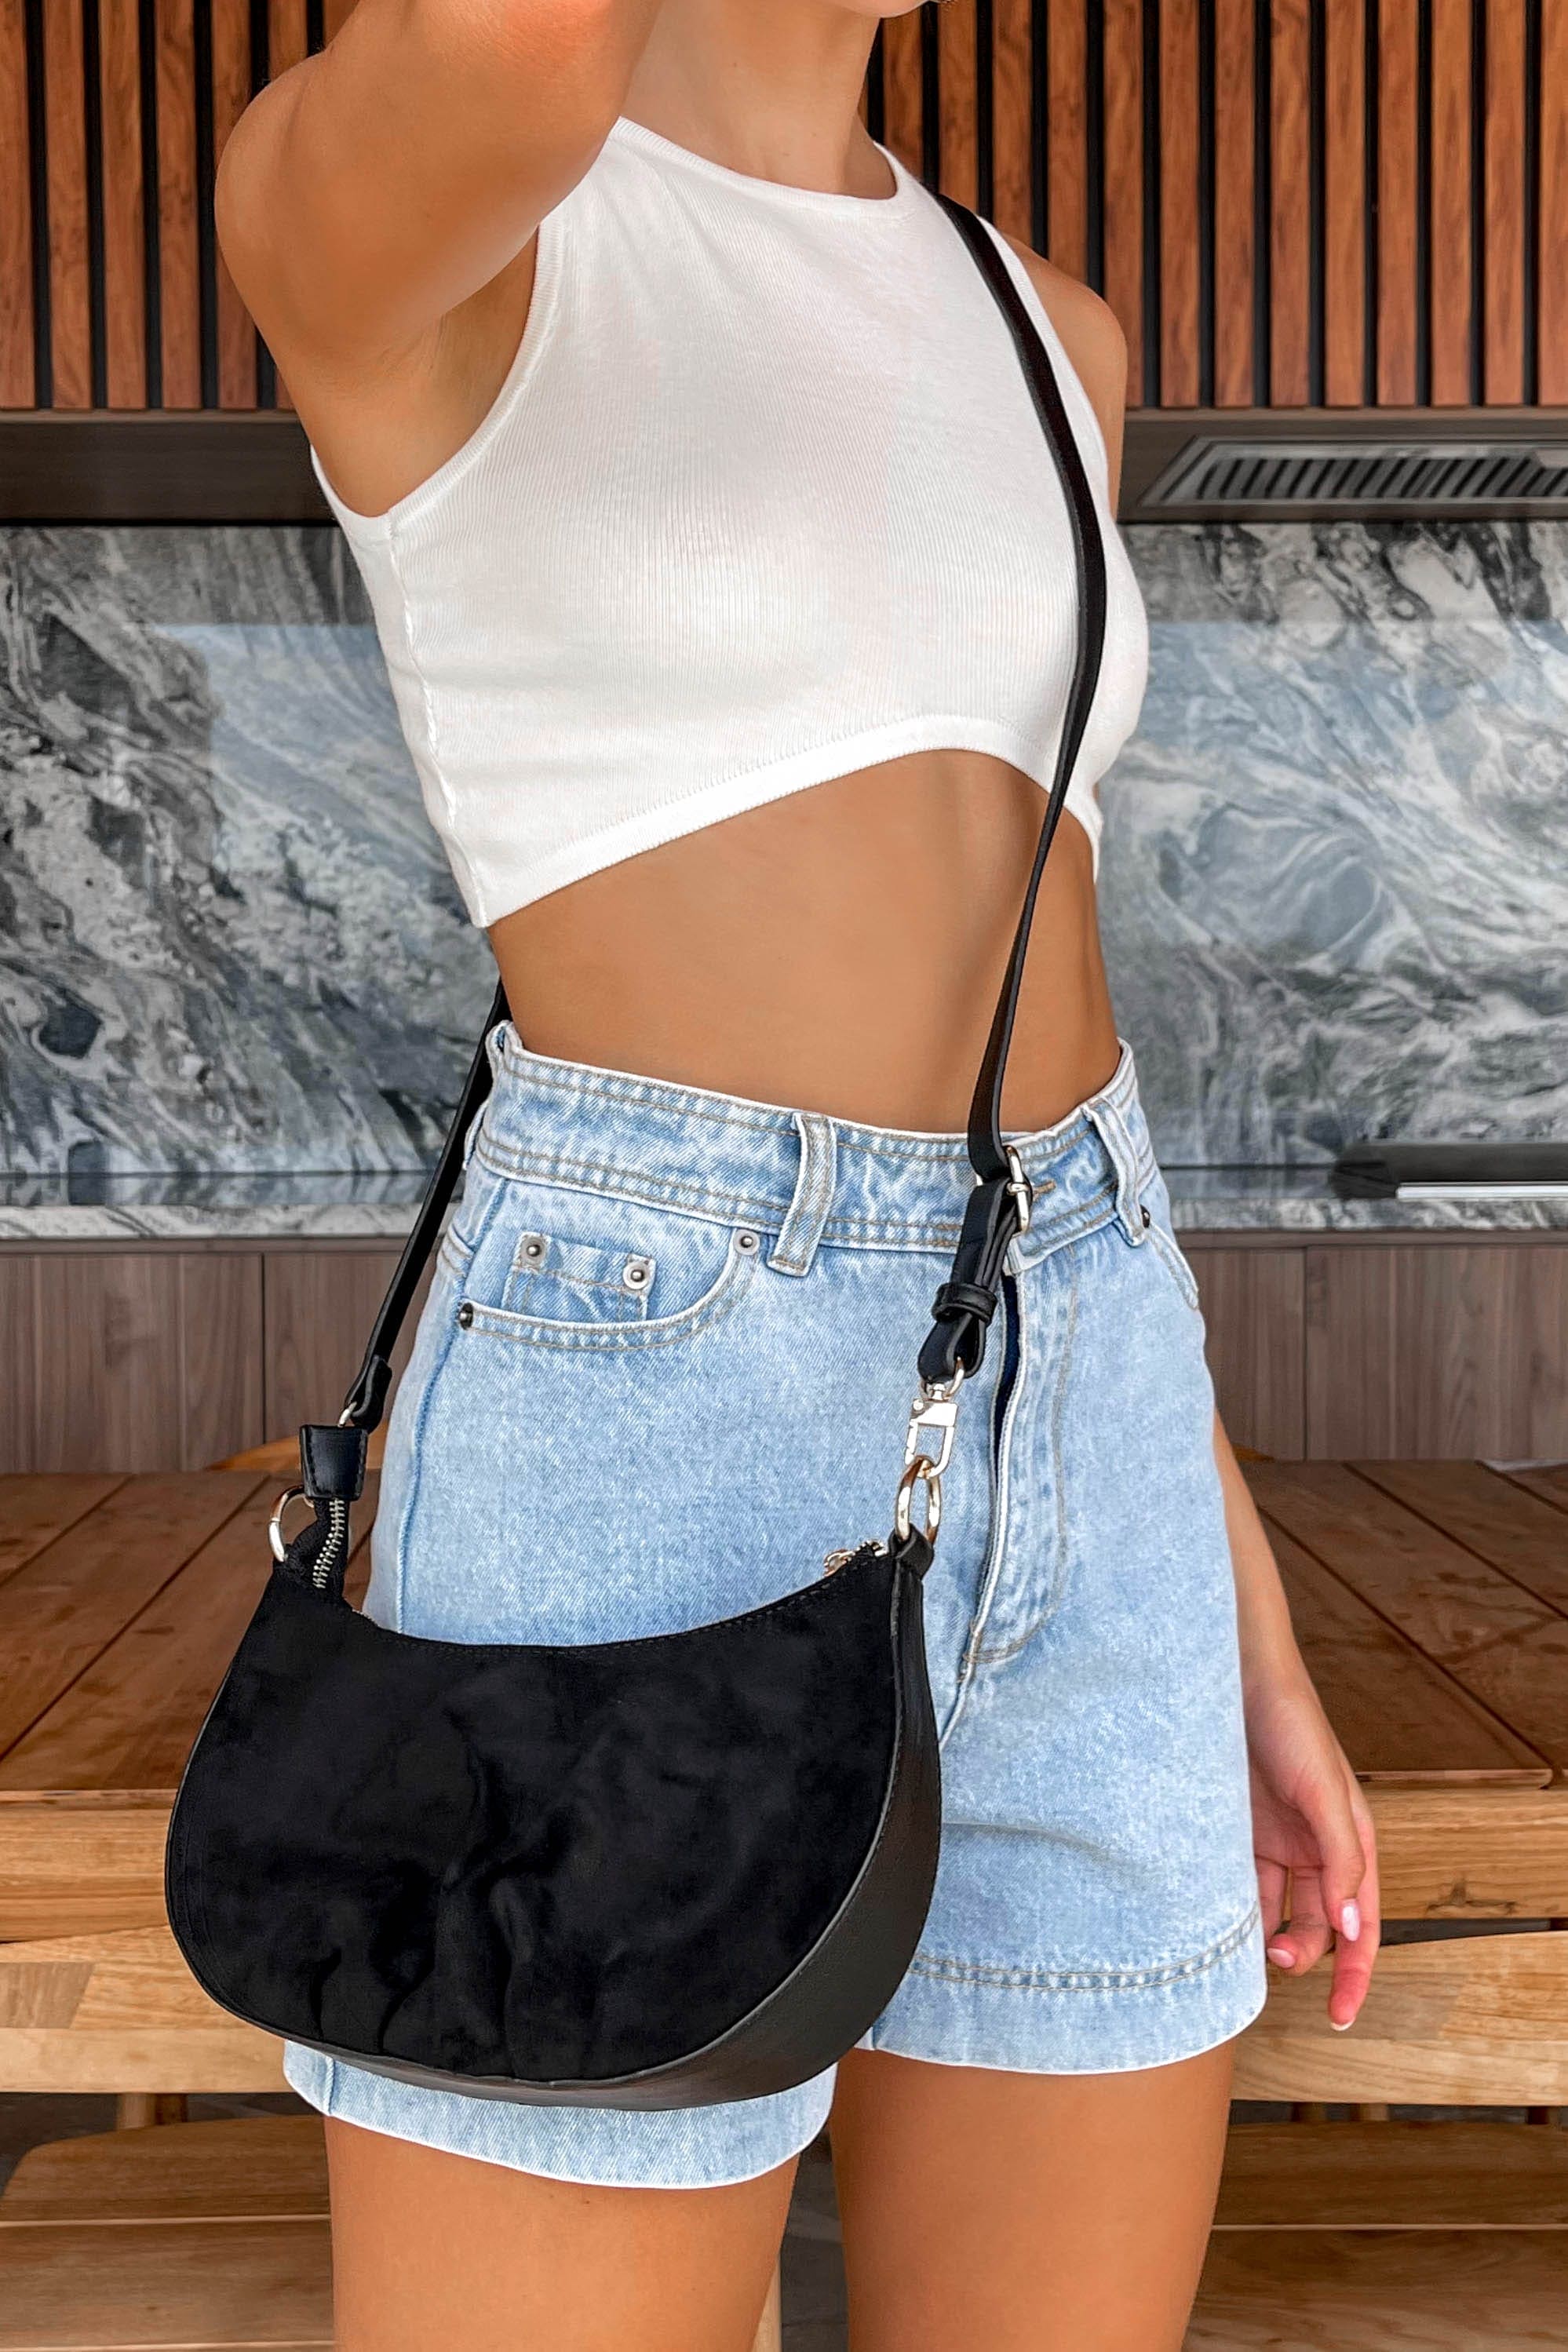 Afterwards Bag, ACCESSORIES, BAG, BAGS, BLACK, new arrivals, Our New Afterwards Bag Is Now Only $61.00 Exclusive At Mishkah, We Have The Latest Fashion Accessories @ Mishkah Online Fashion Boutique Our New Afterwards Bag is now only $61.00-MISHKAH